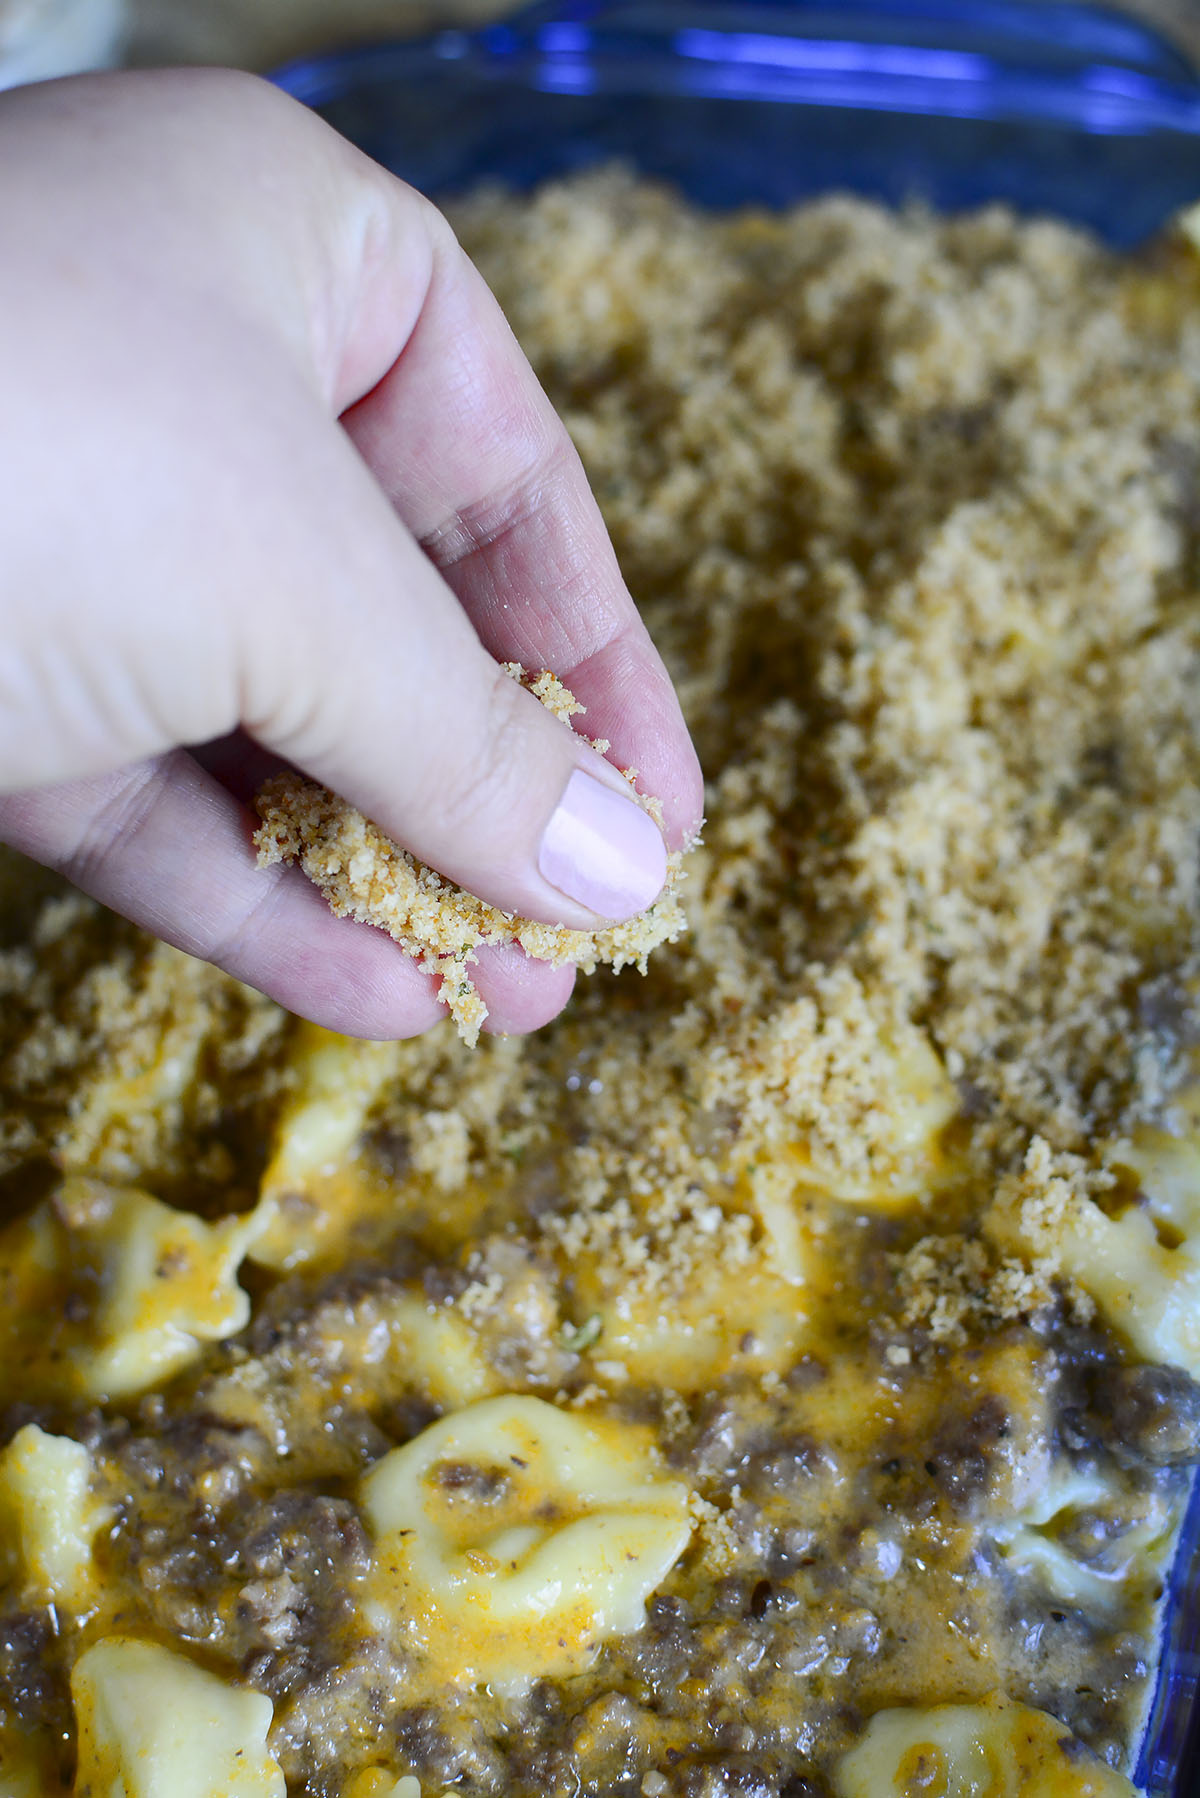 Sprinkling breadcrumbs over top the casserole.